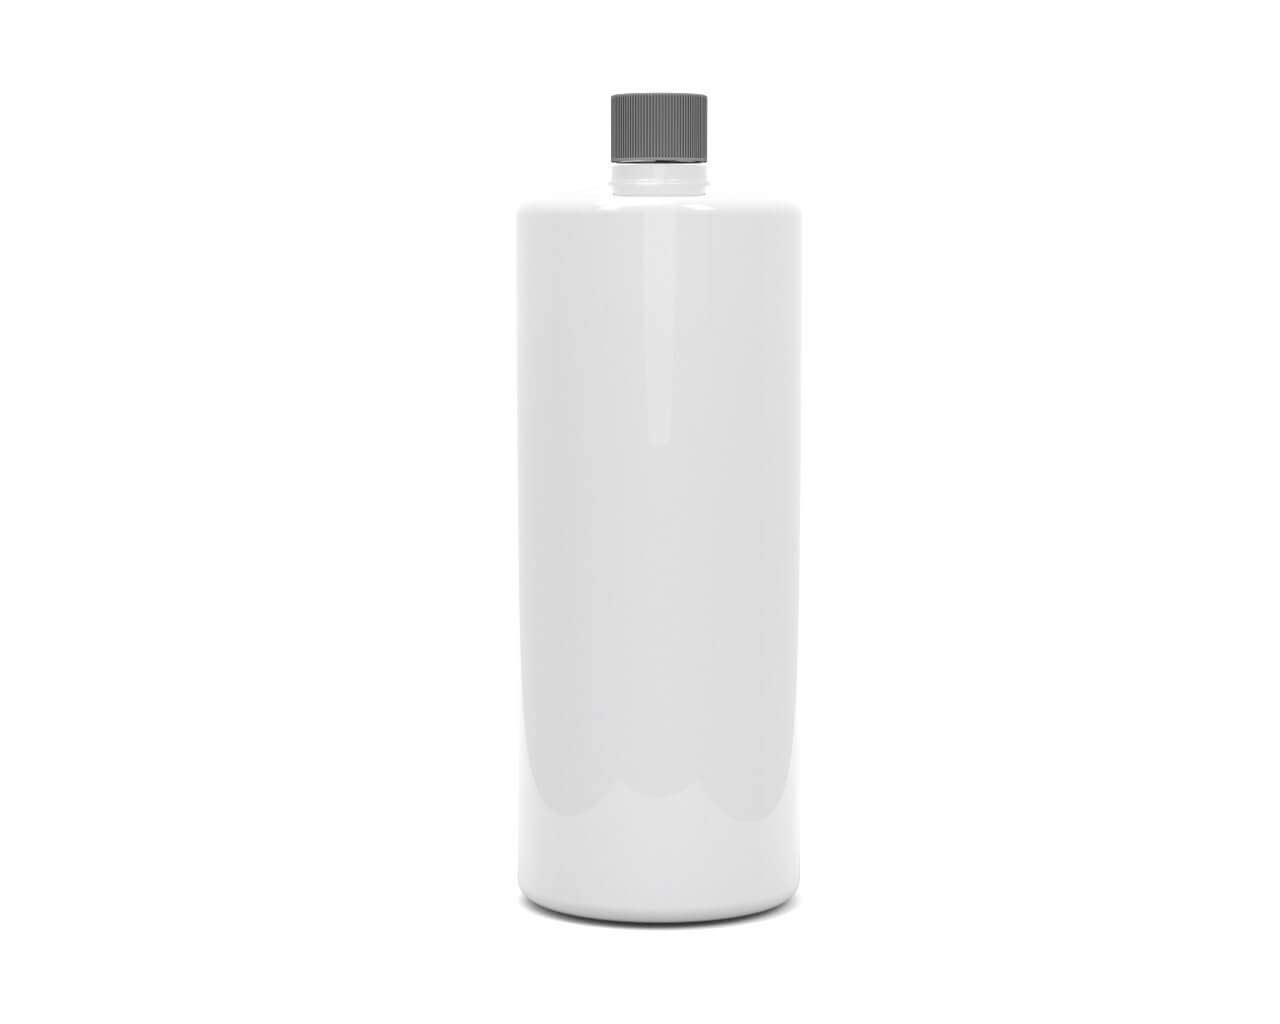 PrimoChill Opaque Computer WaterCooling Fluid - Pre-Mix (32oz) - Sky White SX